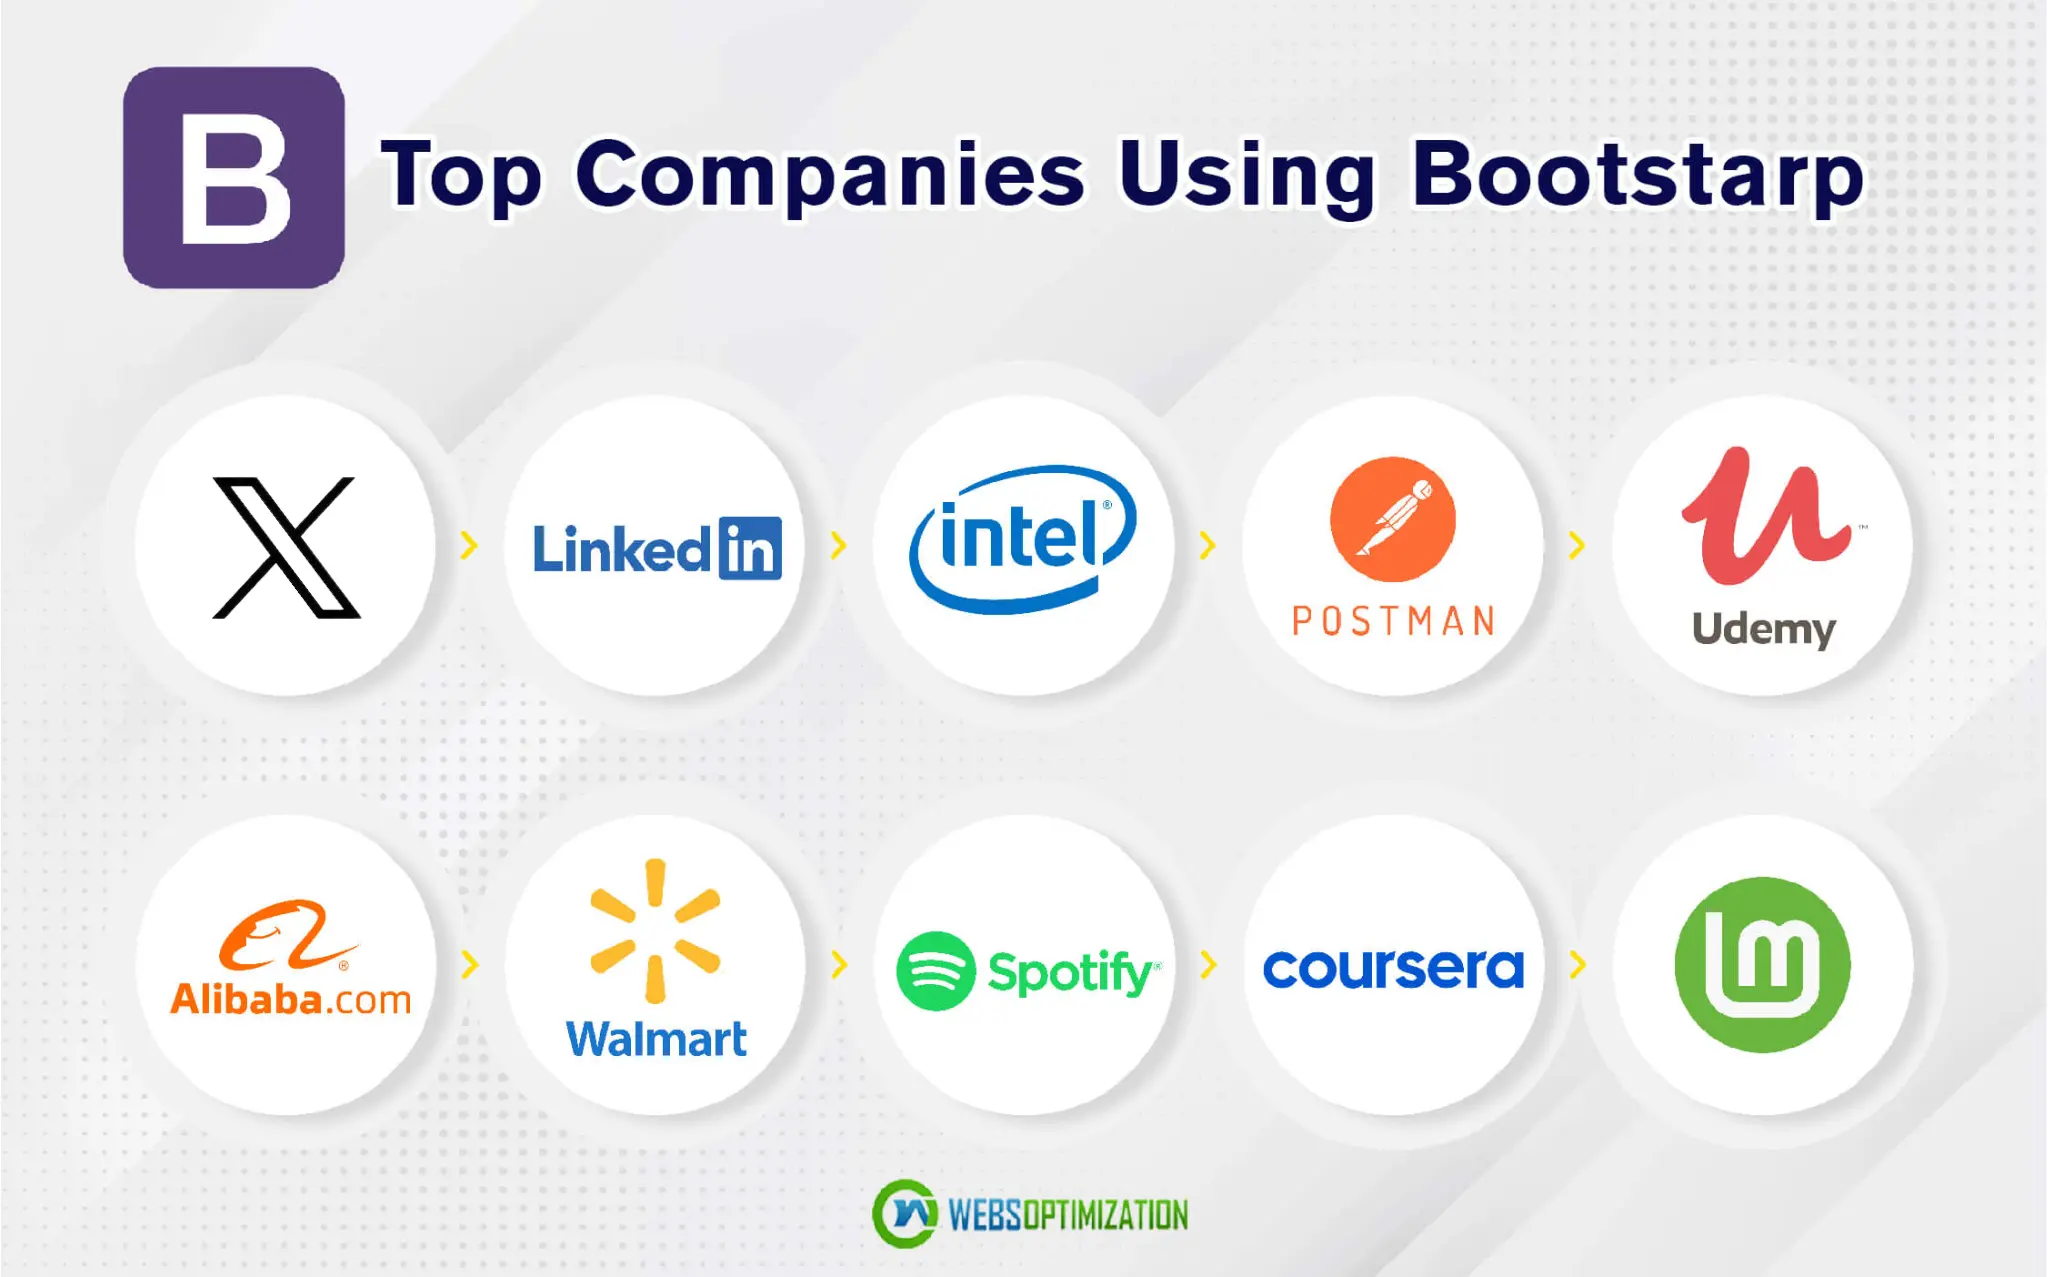 Top companies using Bootstrap